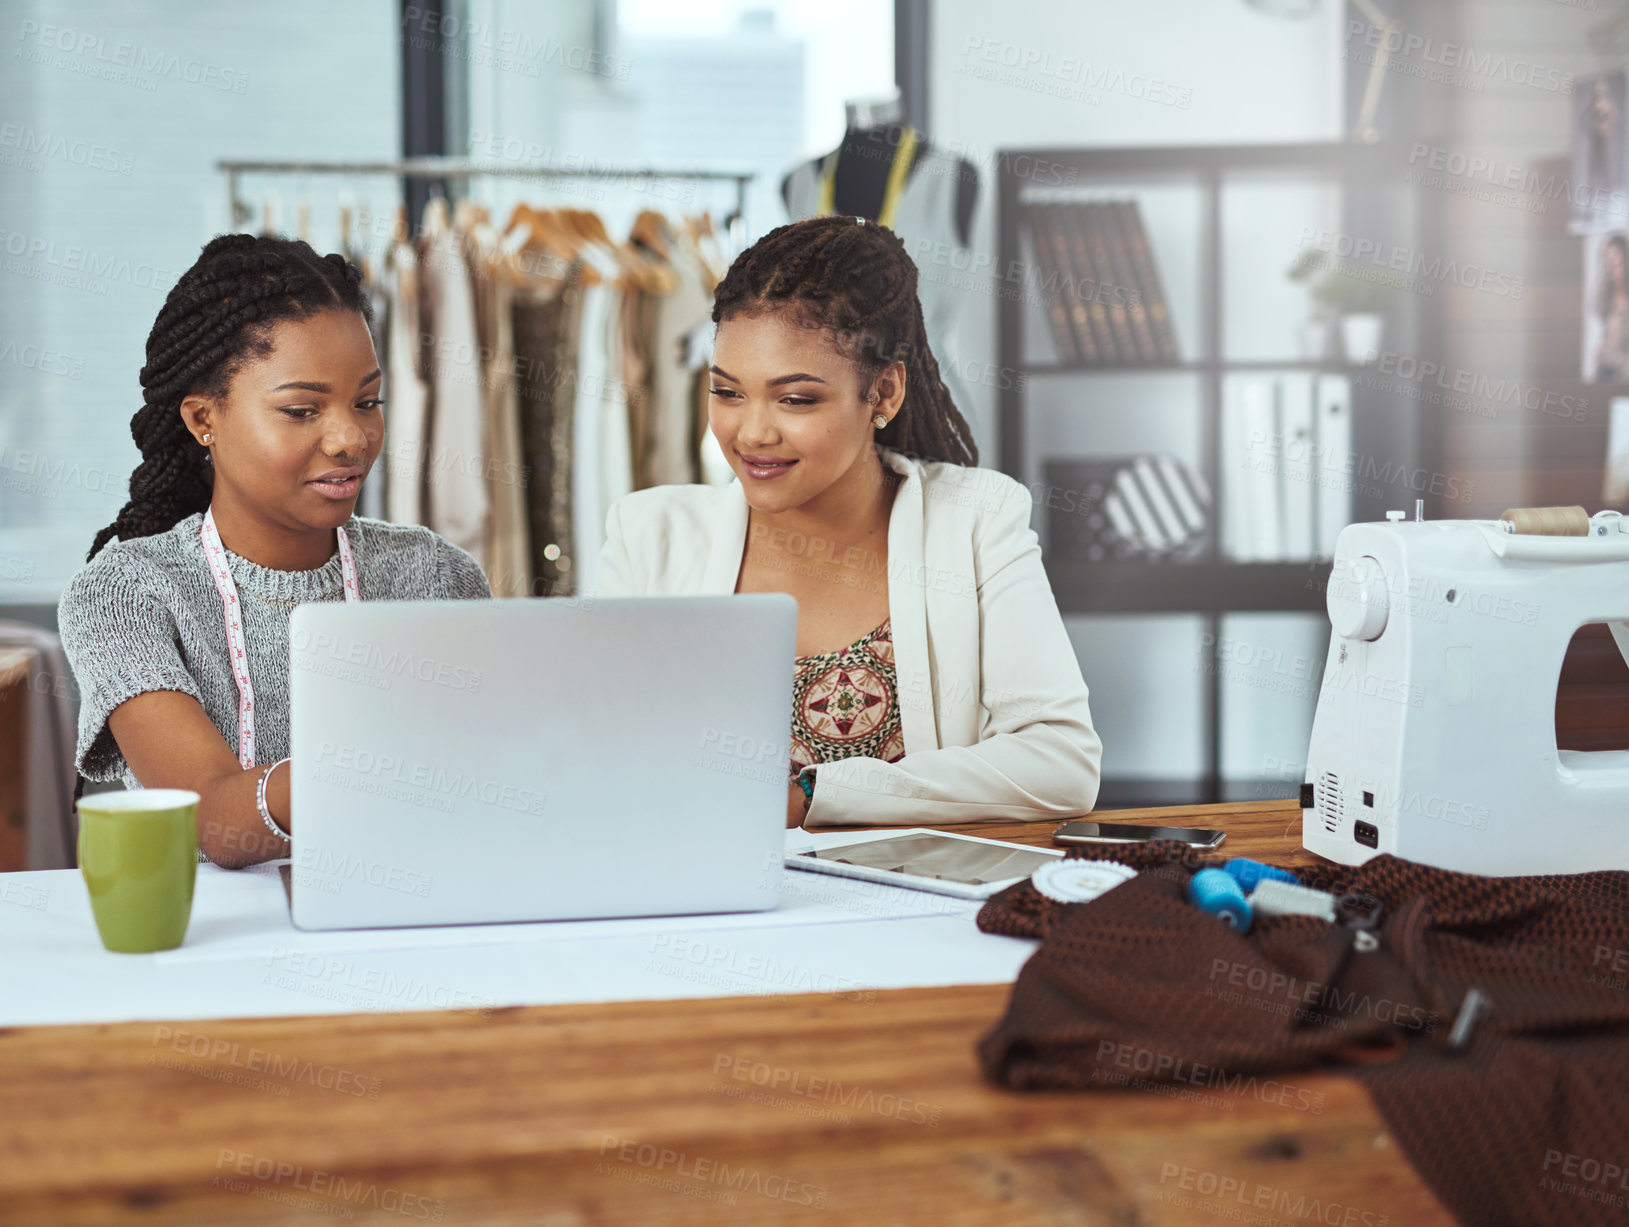 Buy stock photo Cropped shot of two young fashion designers working on a laptop